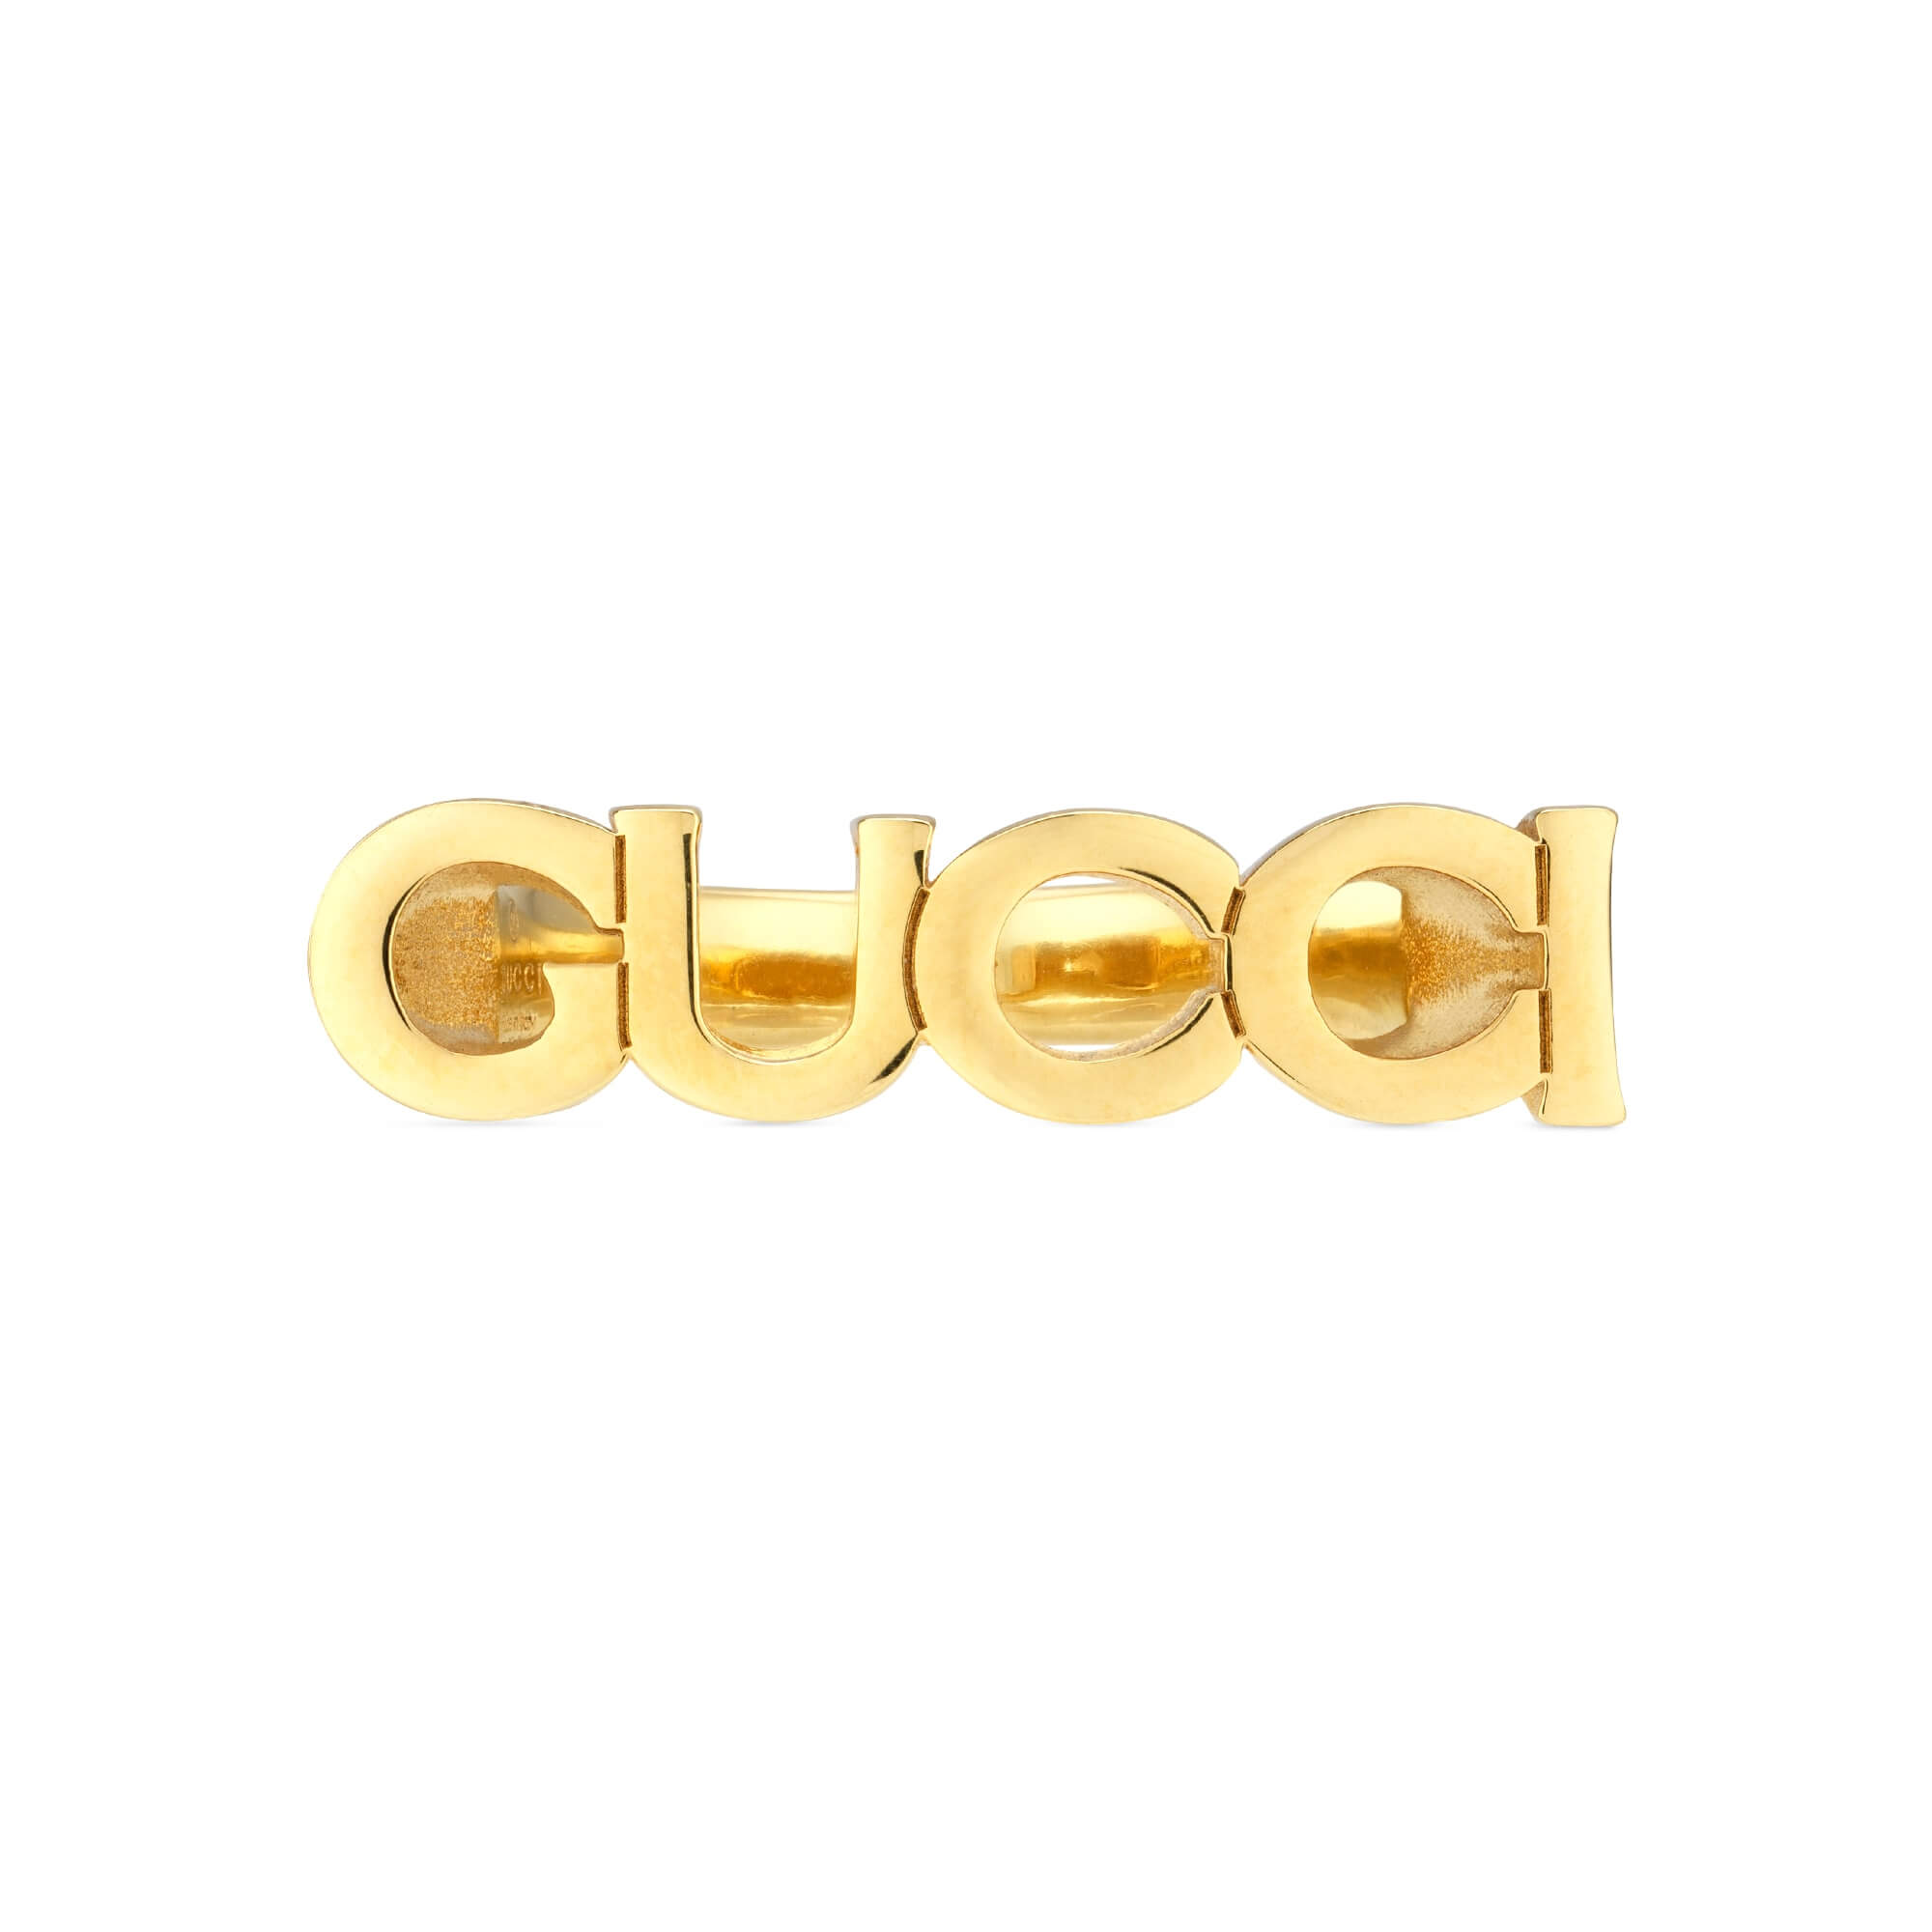 gucci-letter-ring-a-773855I46008005